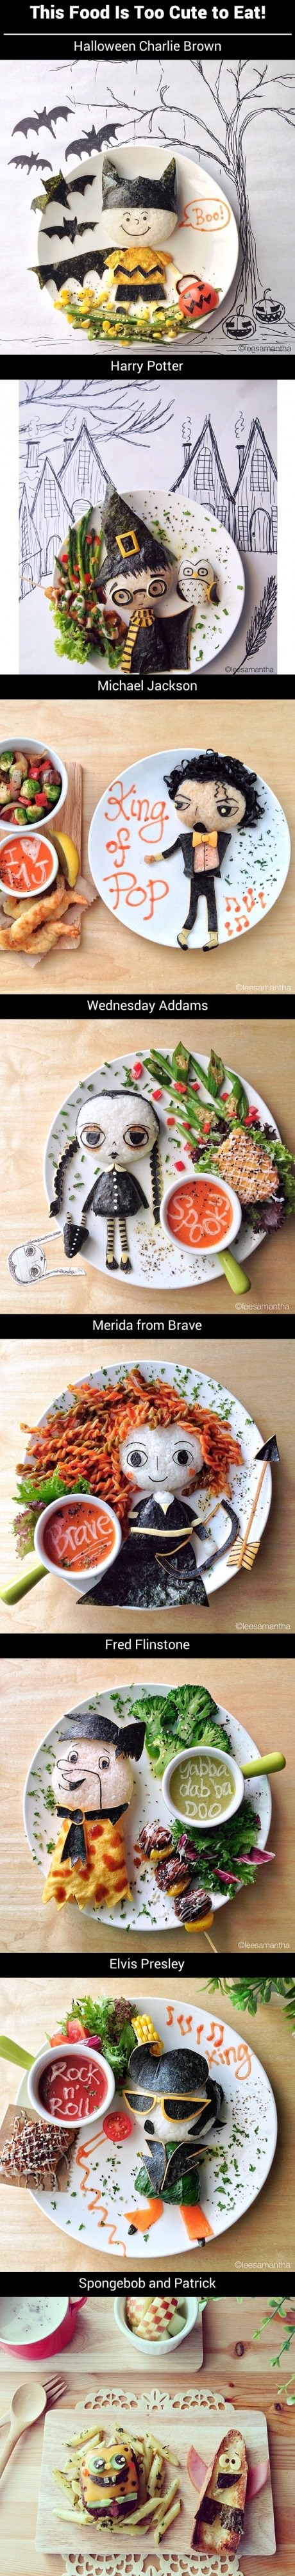 funny-picture-halloween-food-cool